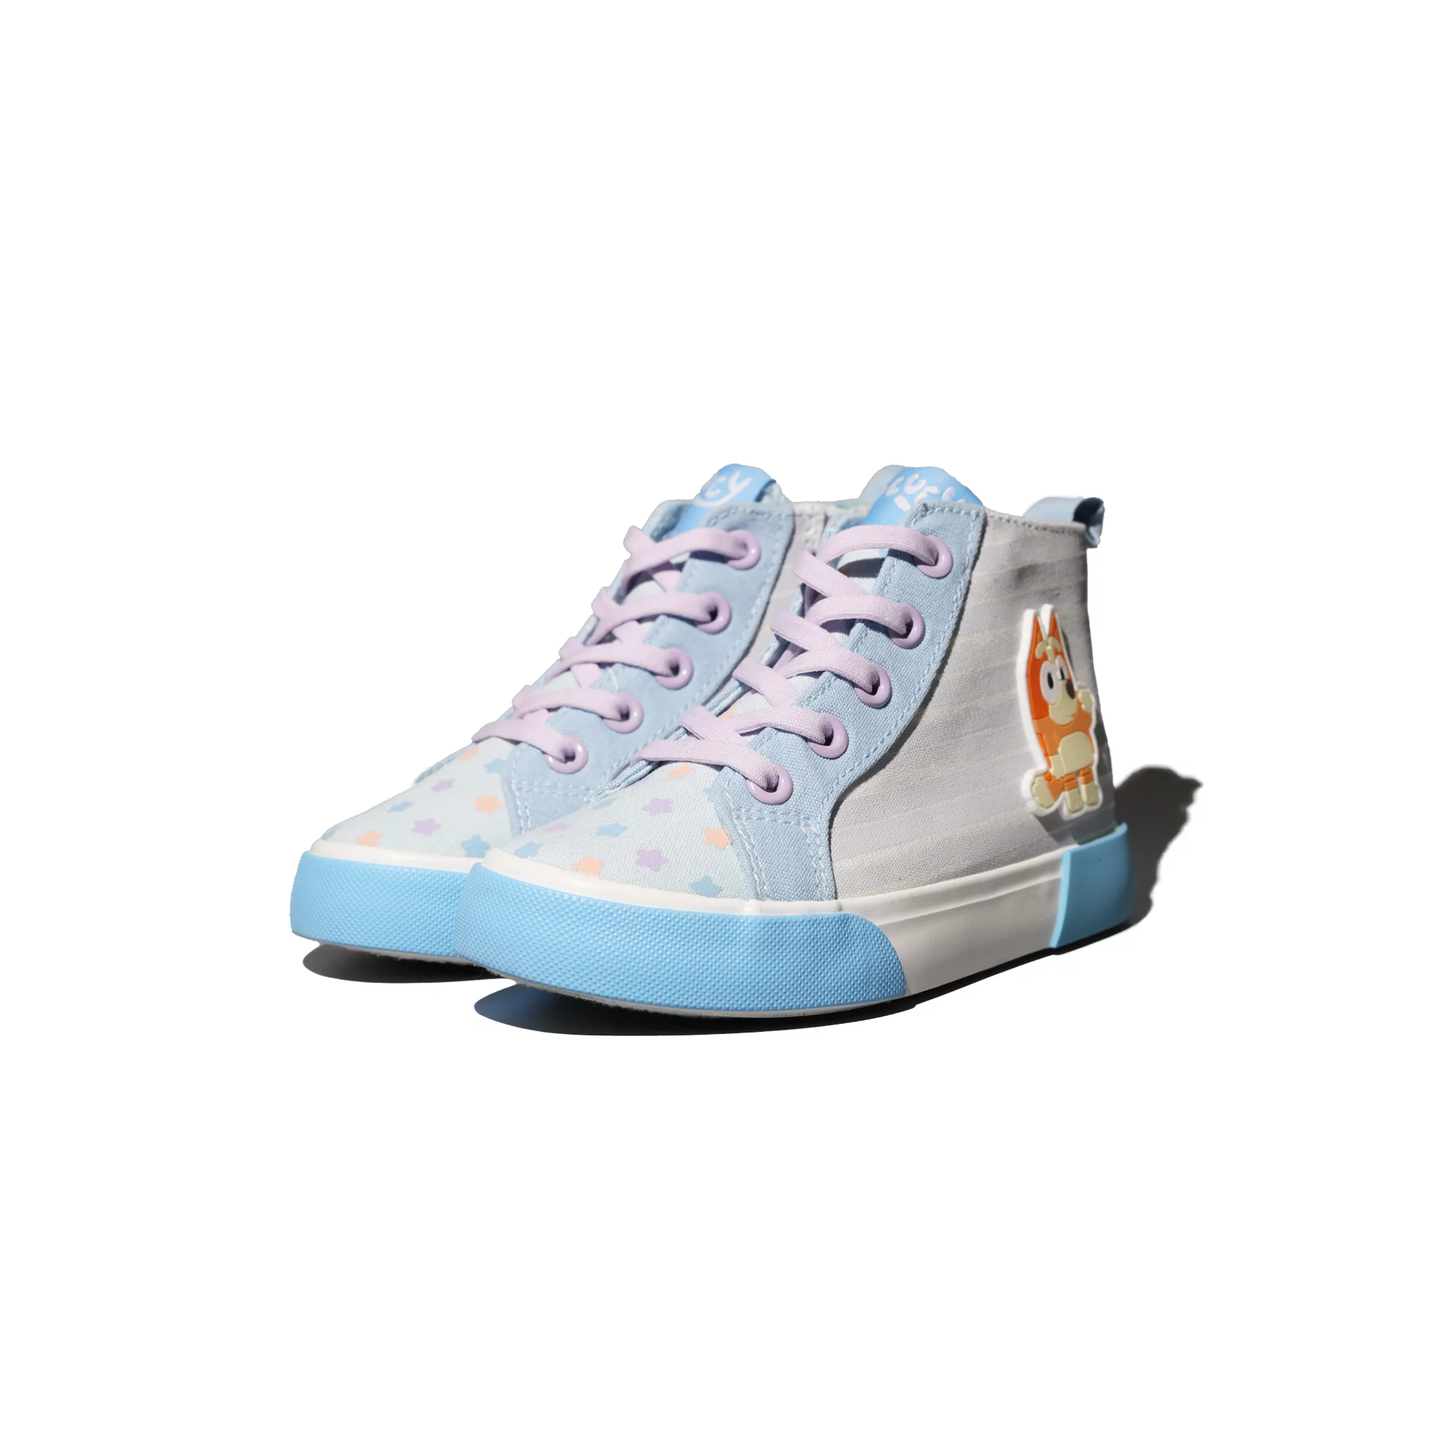 Toddler Girl High Top Sneakers, Sizes 7-12